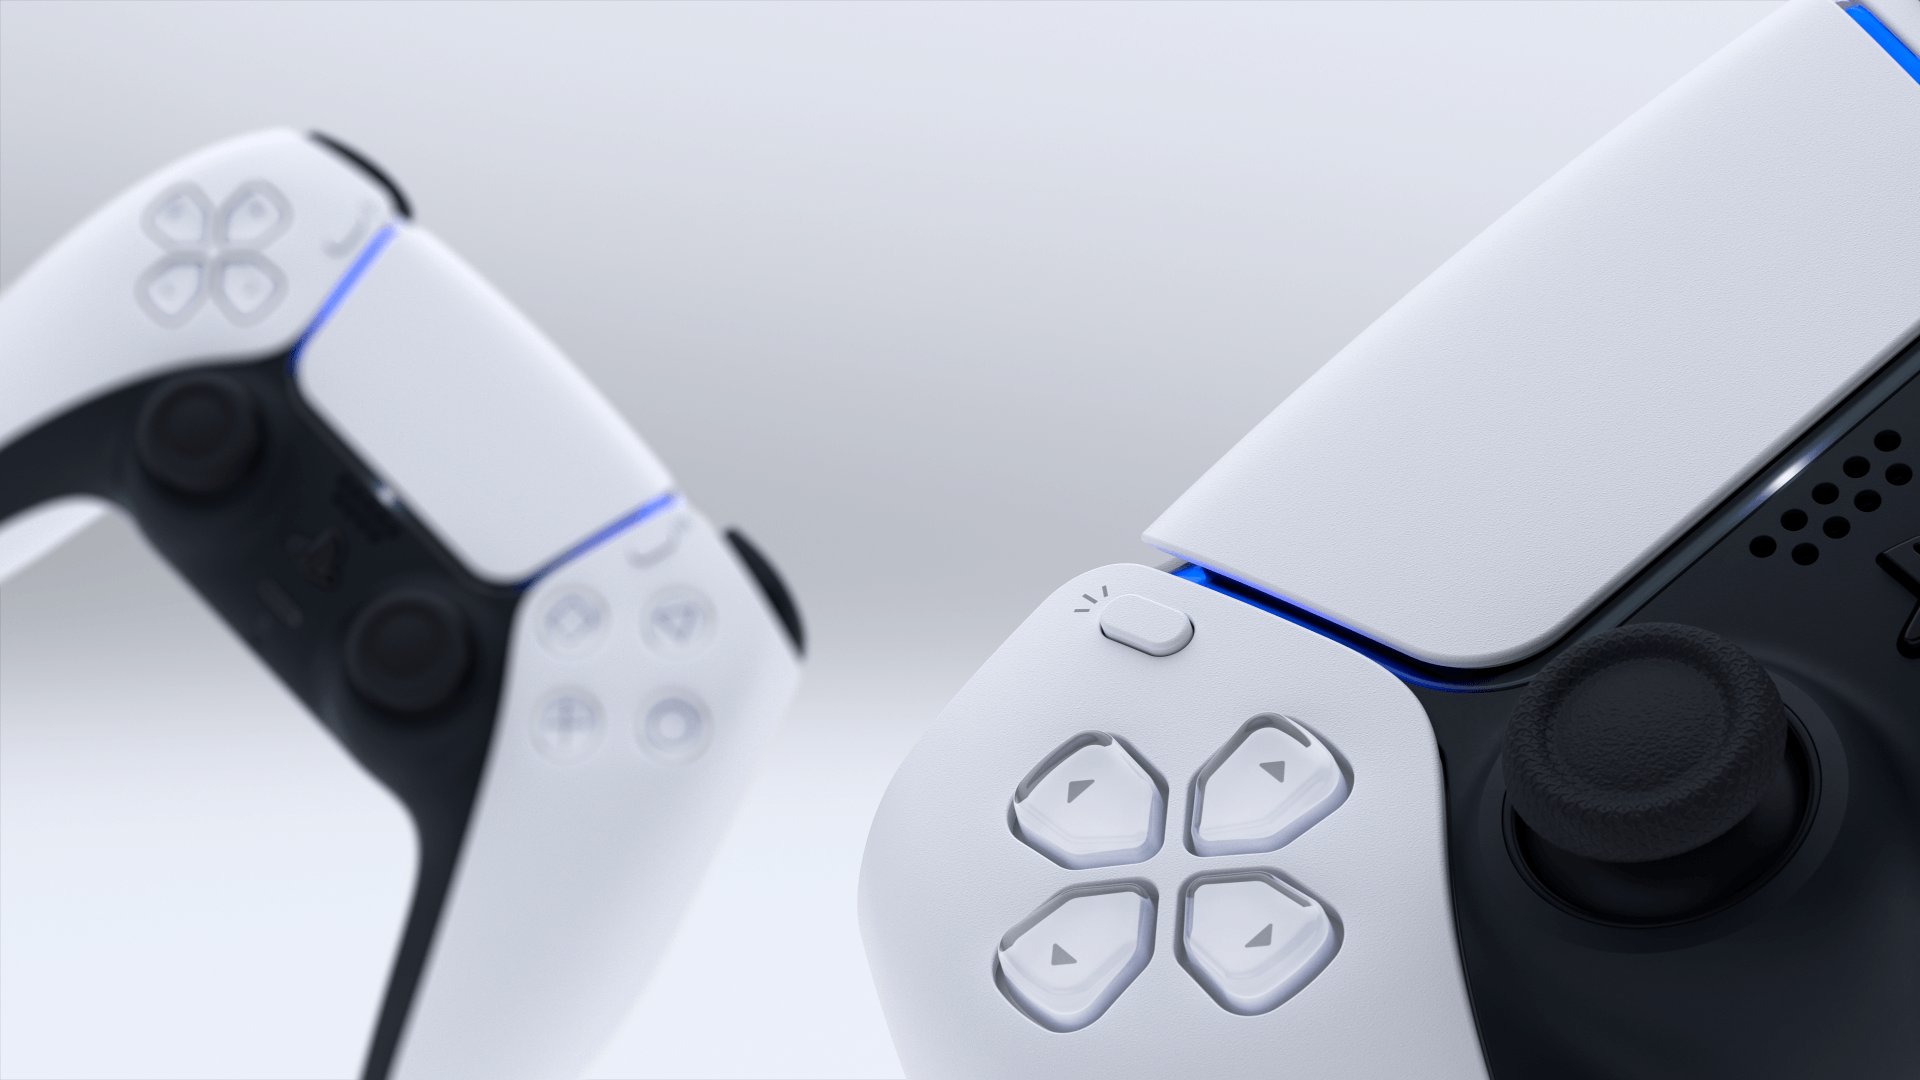 DualSense wireless controller. The innovative new controller for PS5